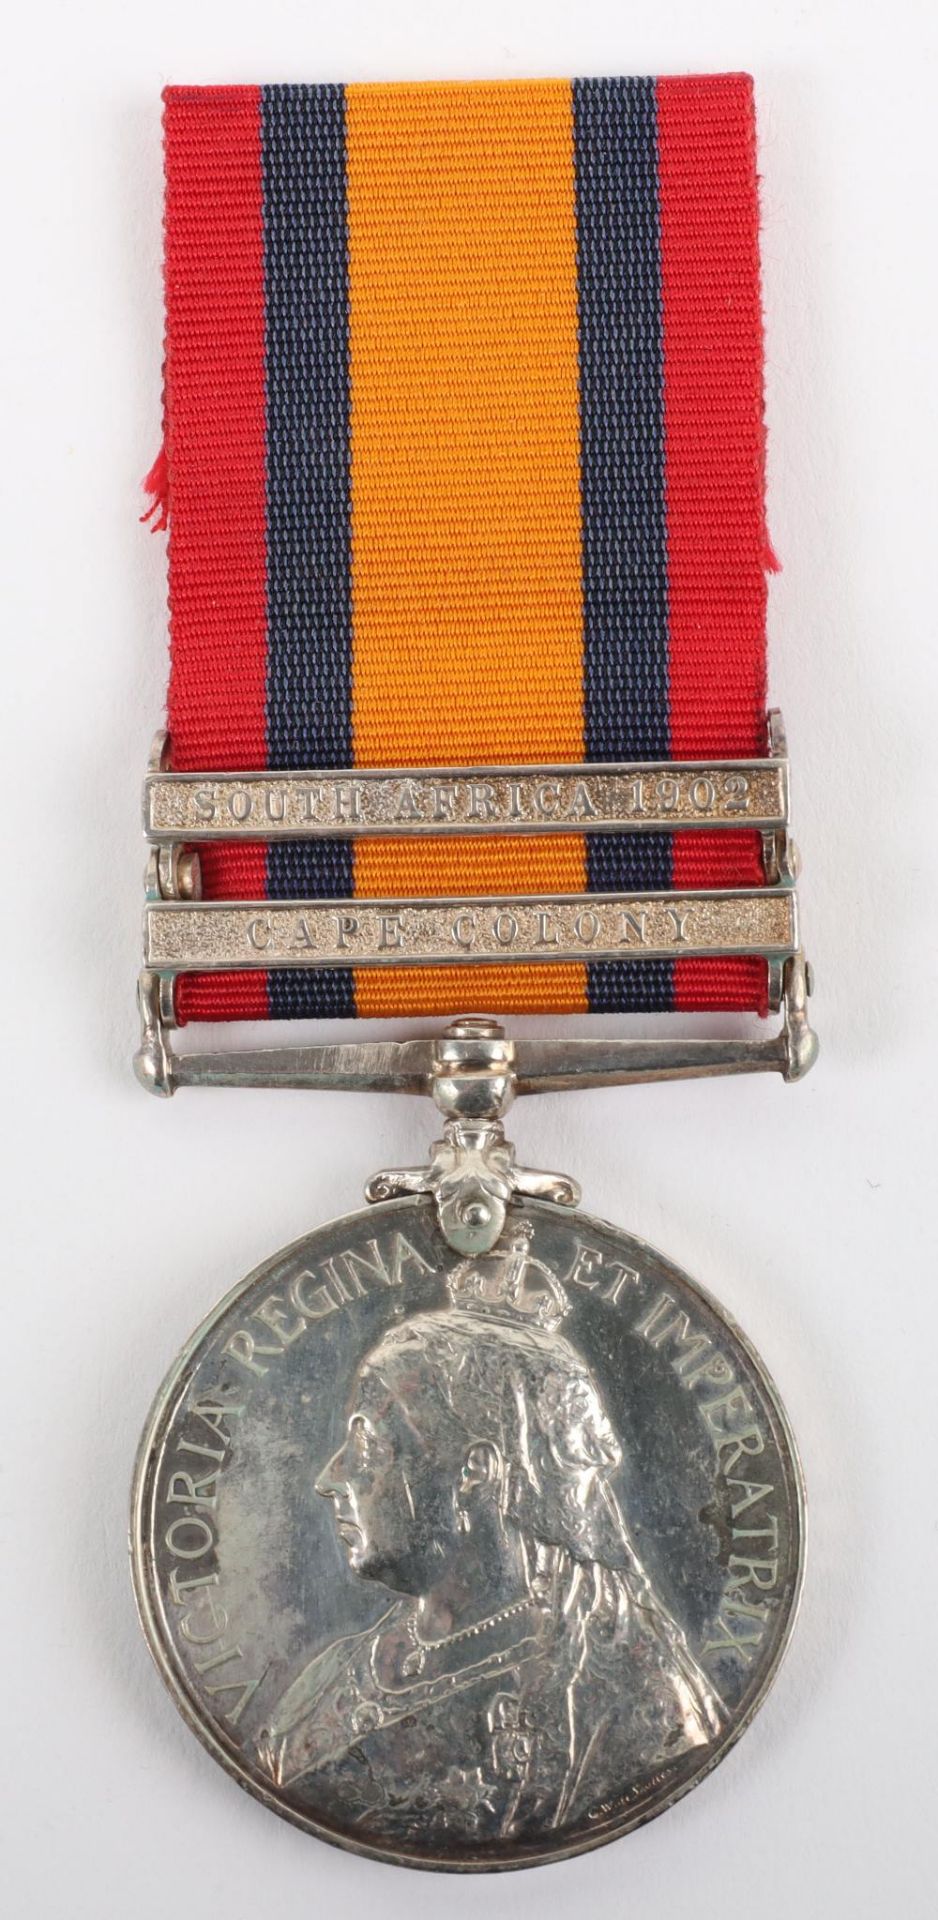 Queens South Africa Medal 4th Battalion the Durham Light Infantry